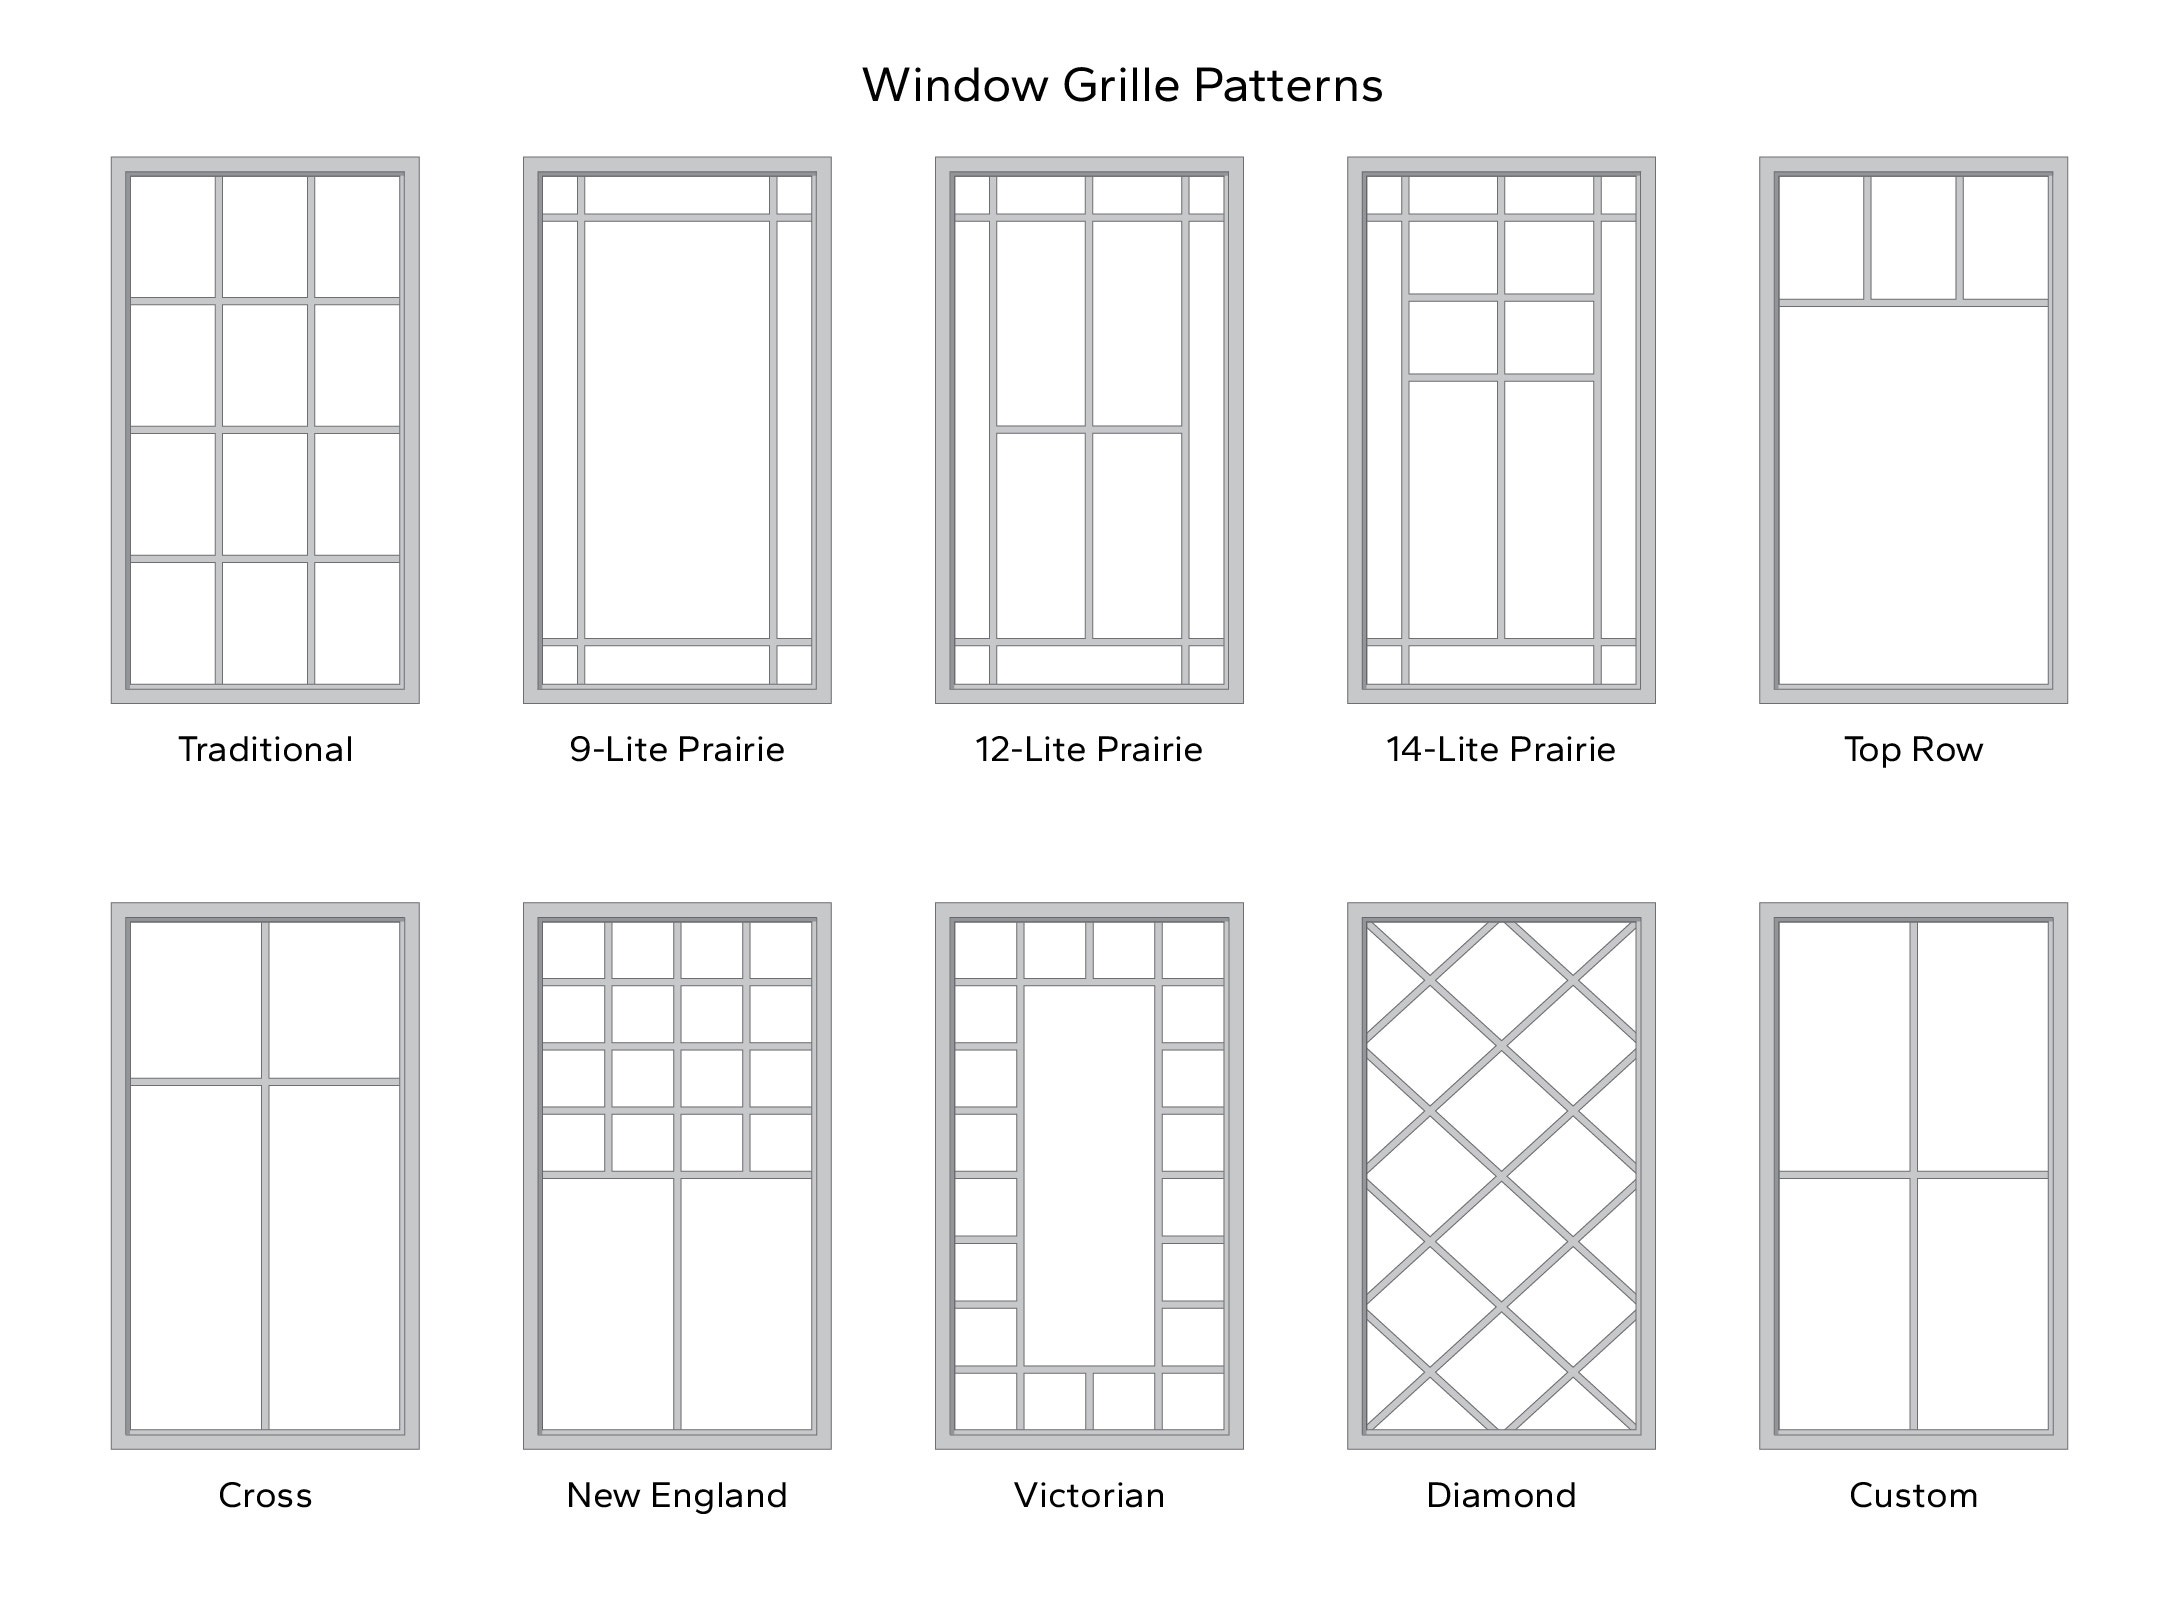 illustrations of various window grille patterns